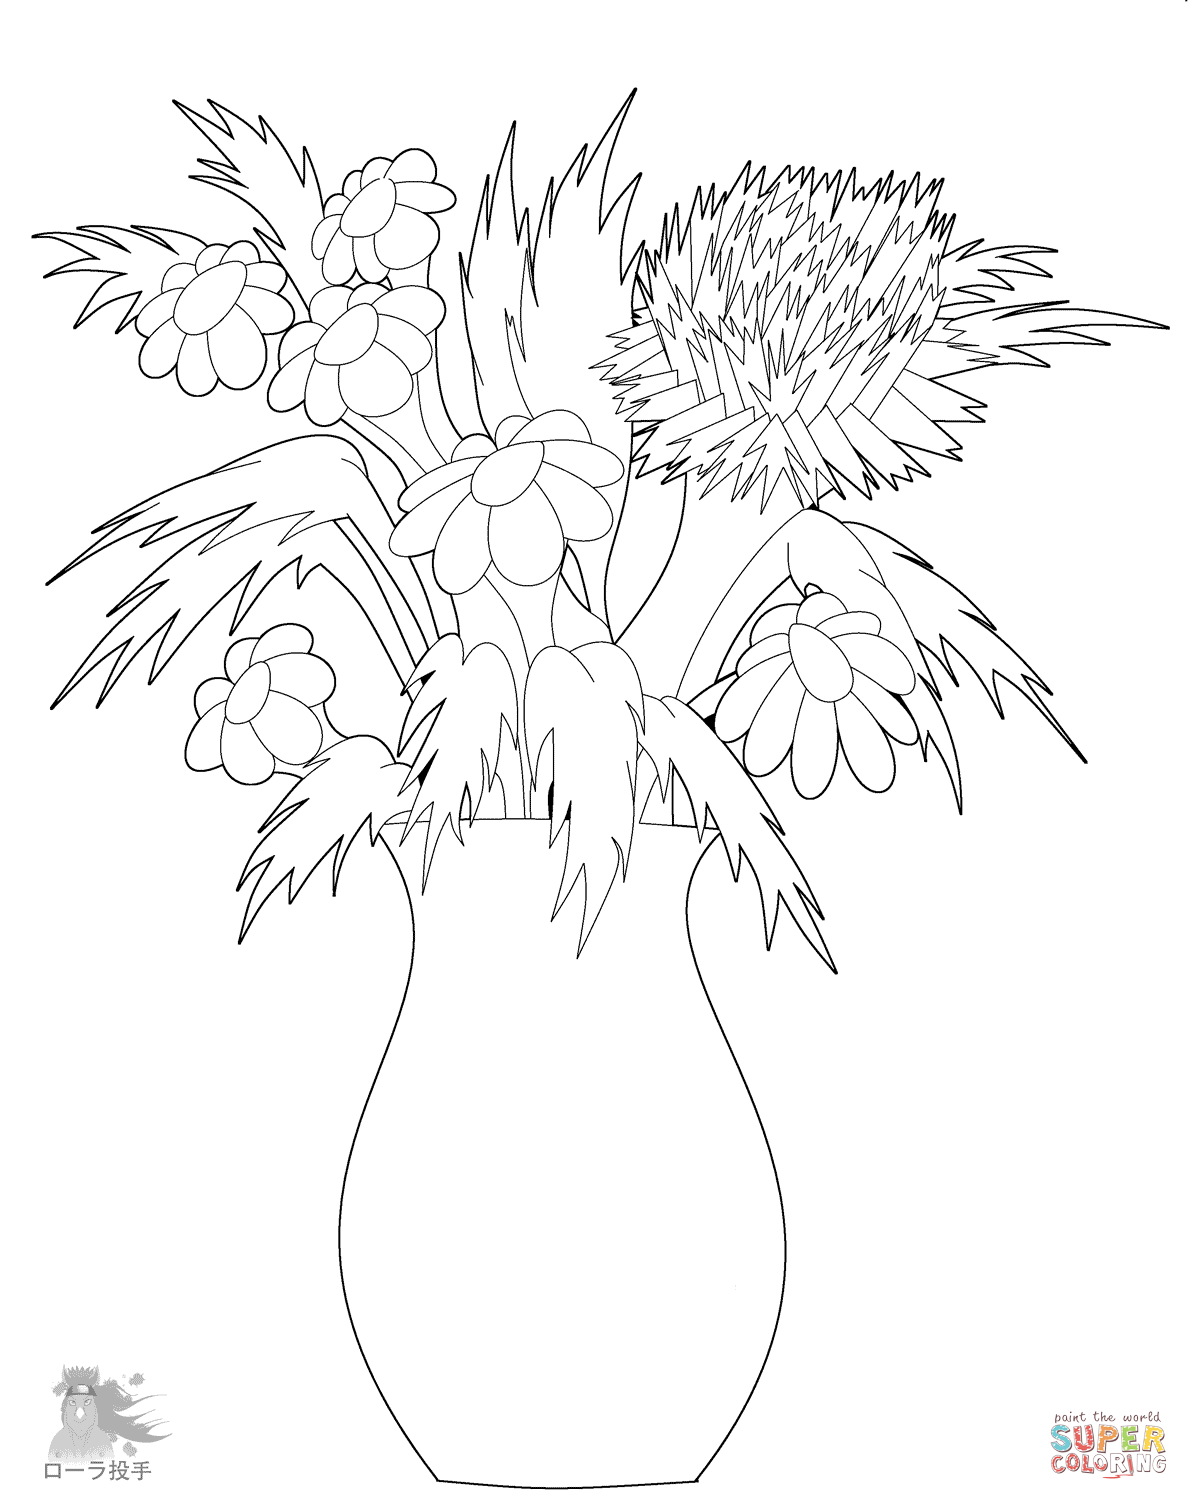 Flowers in Vase coloring page | Free Printable Coloring Pages